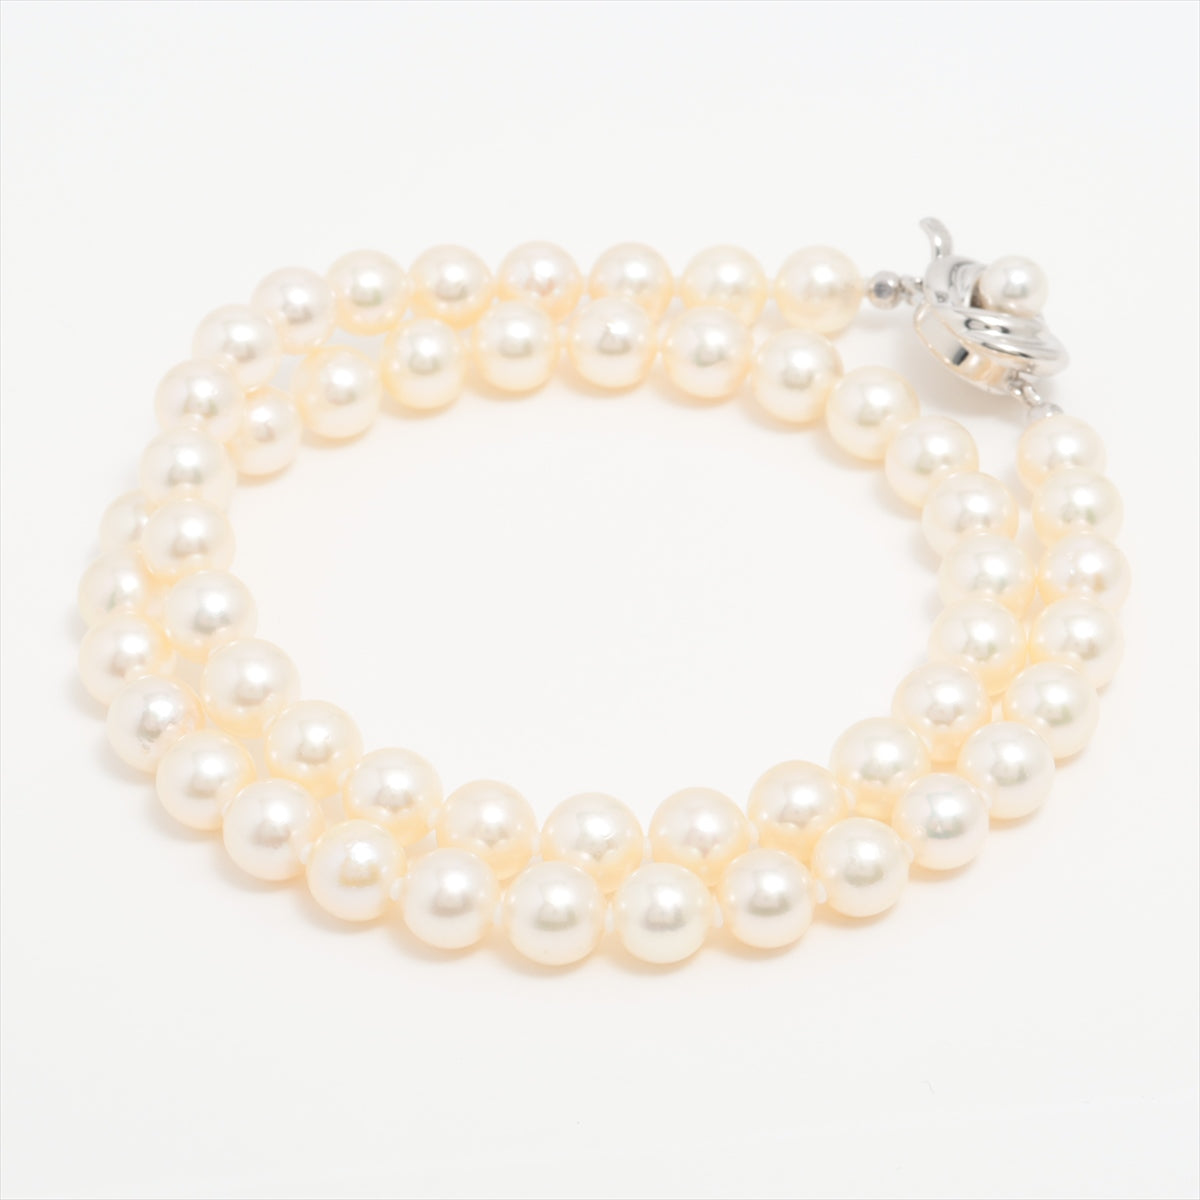 TASAKI Pearl Necklace SV Total 39.3g Approx. 7.5mm-8.0mm